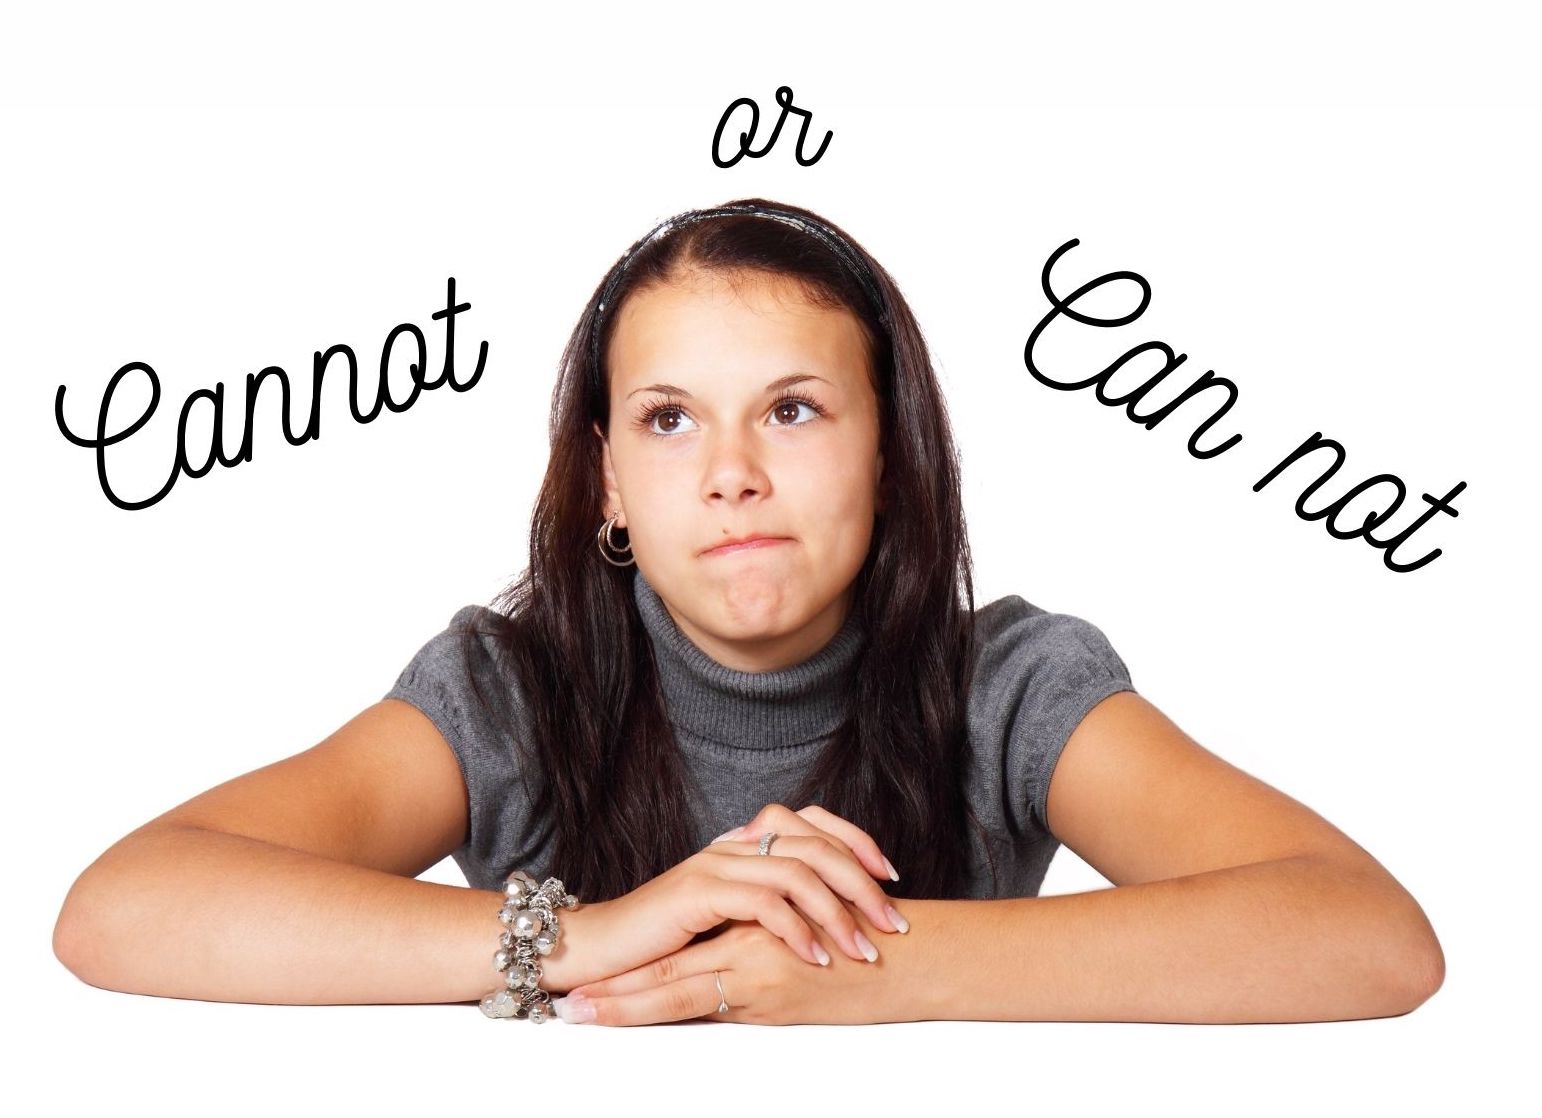 Graphic showing female contemplating Cannot or Can Not 